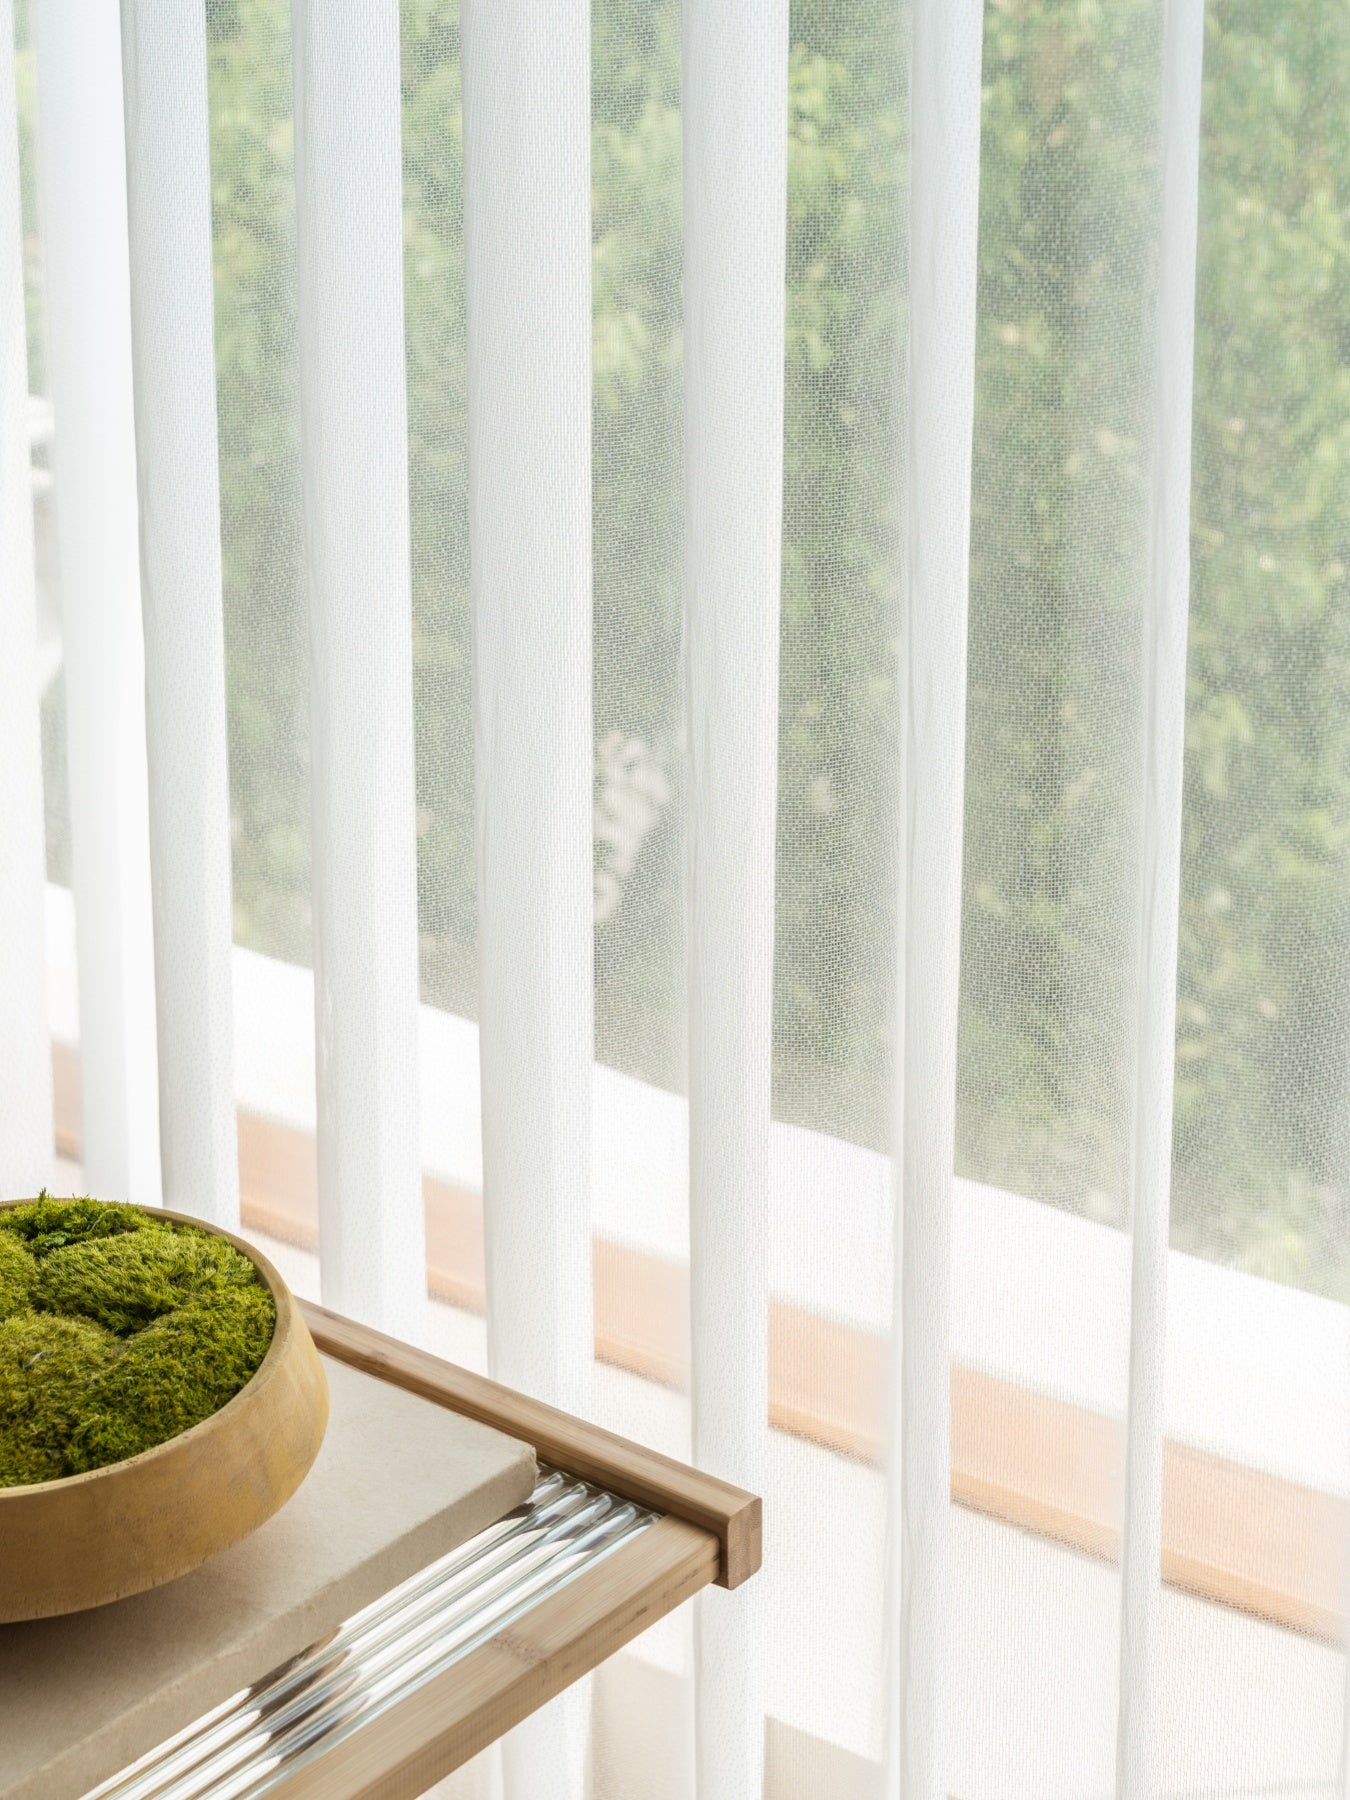 Elegant white sheer curtains from EaseEaseCurtains allowing soft diffused light into a room with a decorative moss bowl on the sill, enhancing the airy and tranquil atmosphere of a sunlit living space